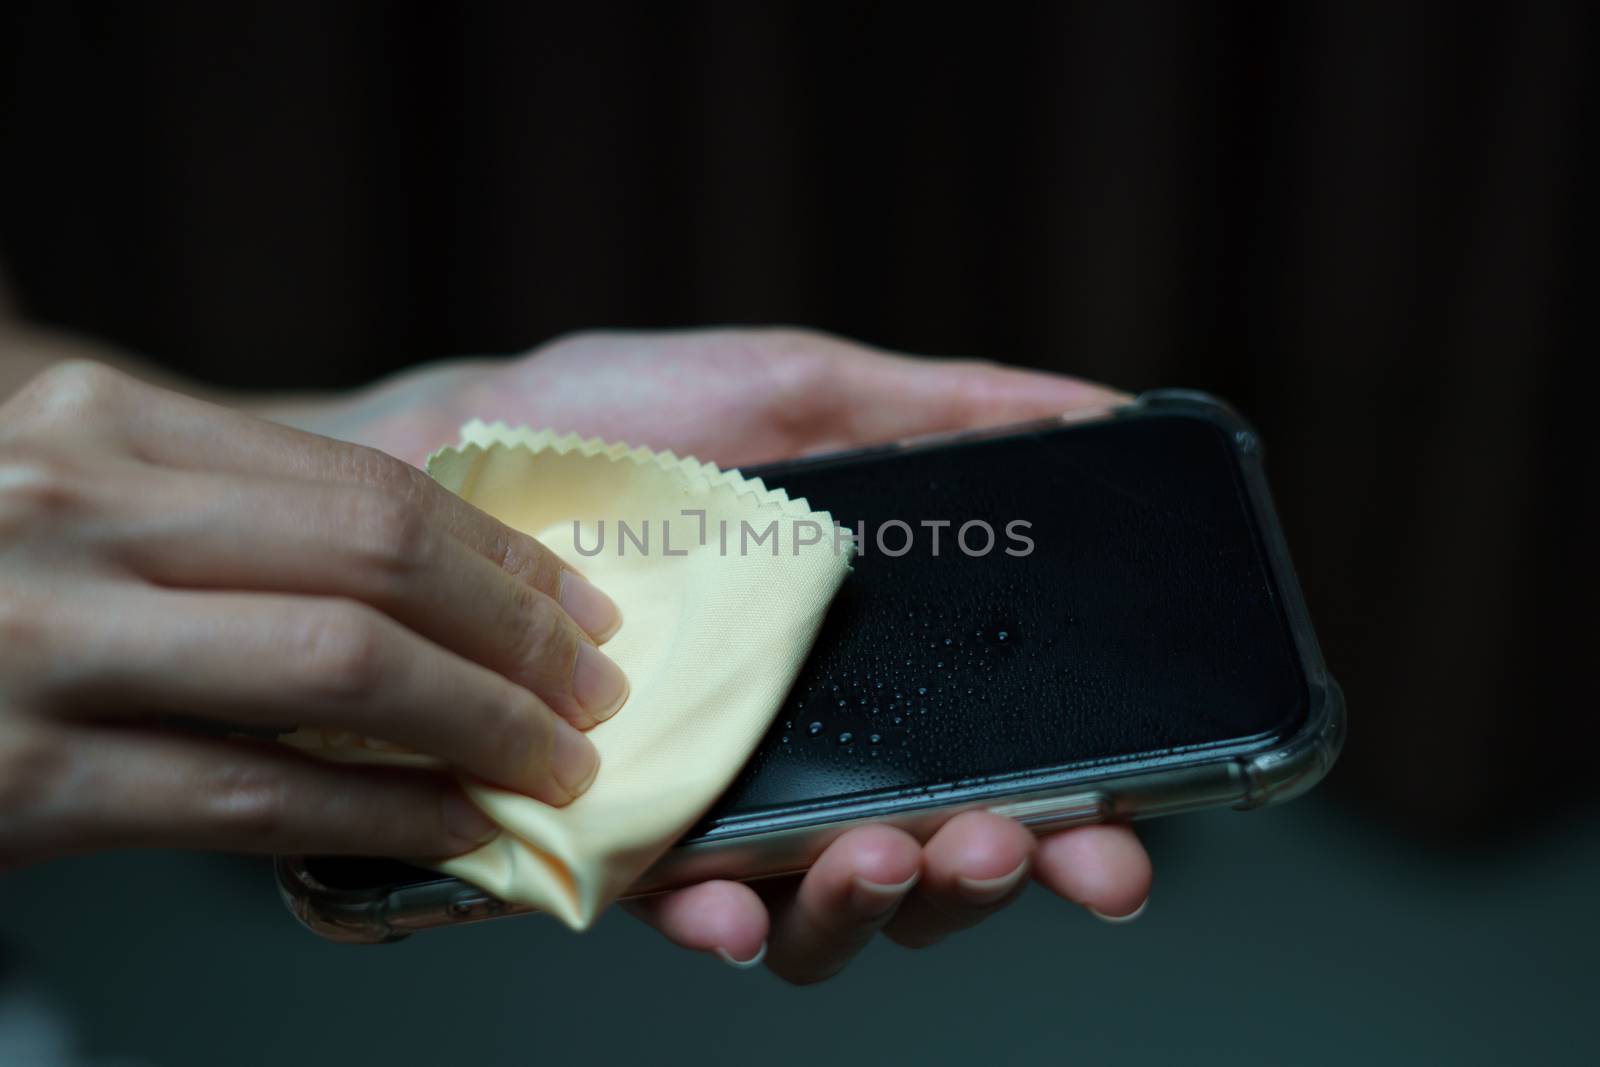 Hand holding and cleaning mobile phone screen with a napkin for corona virus or Covid-19 protection.